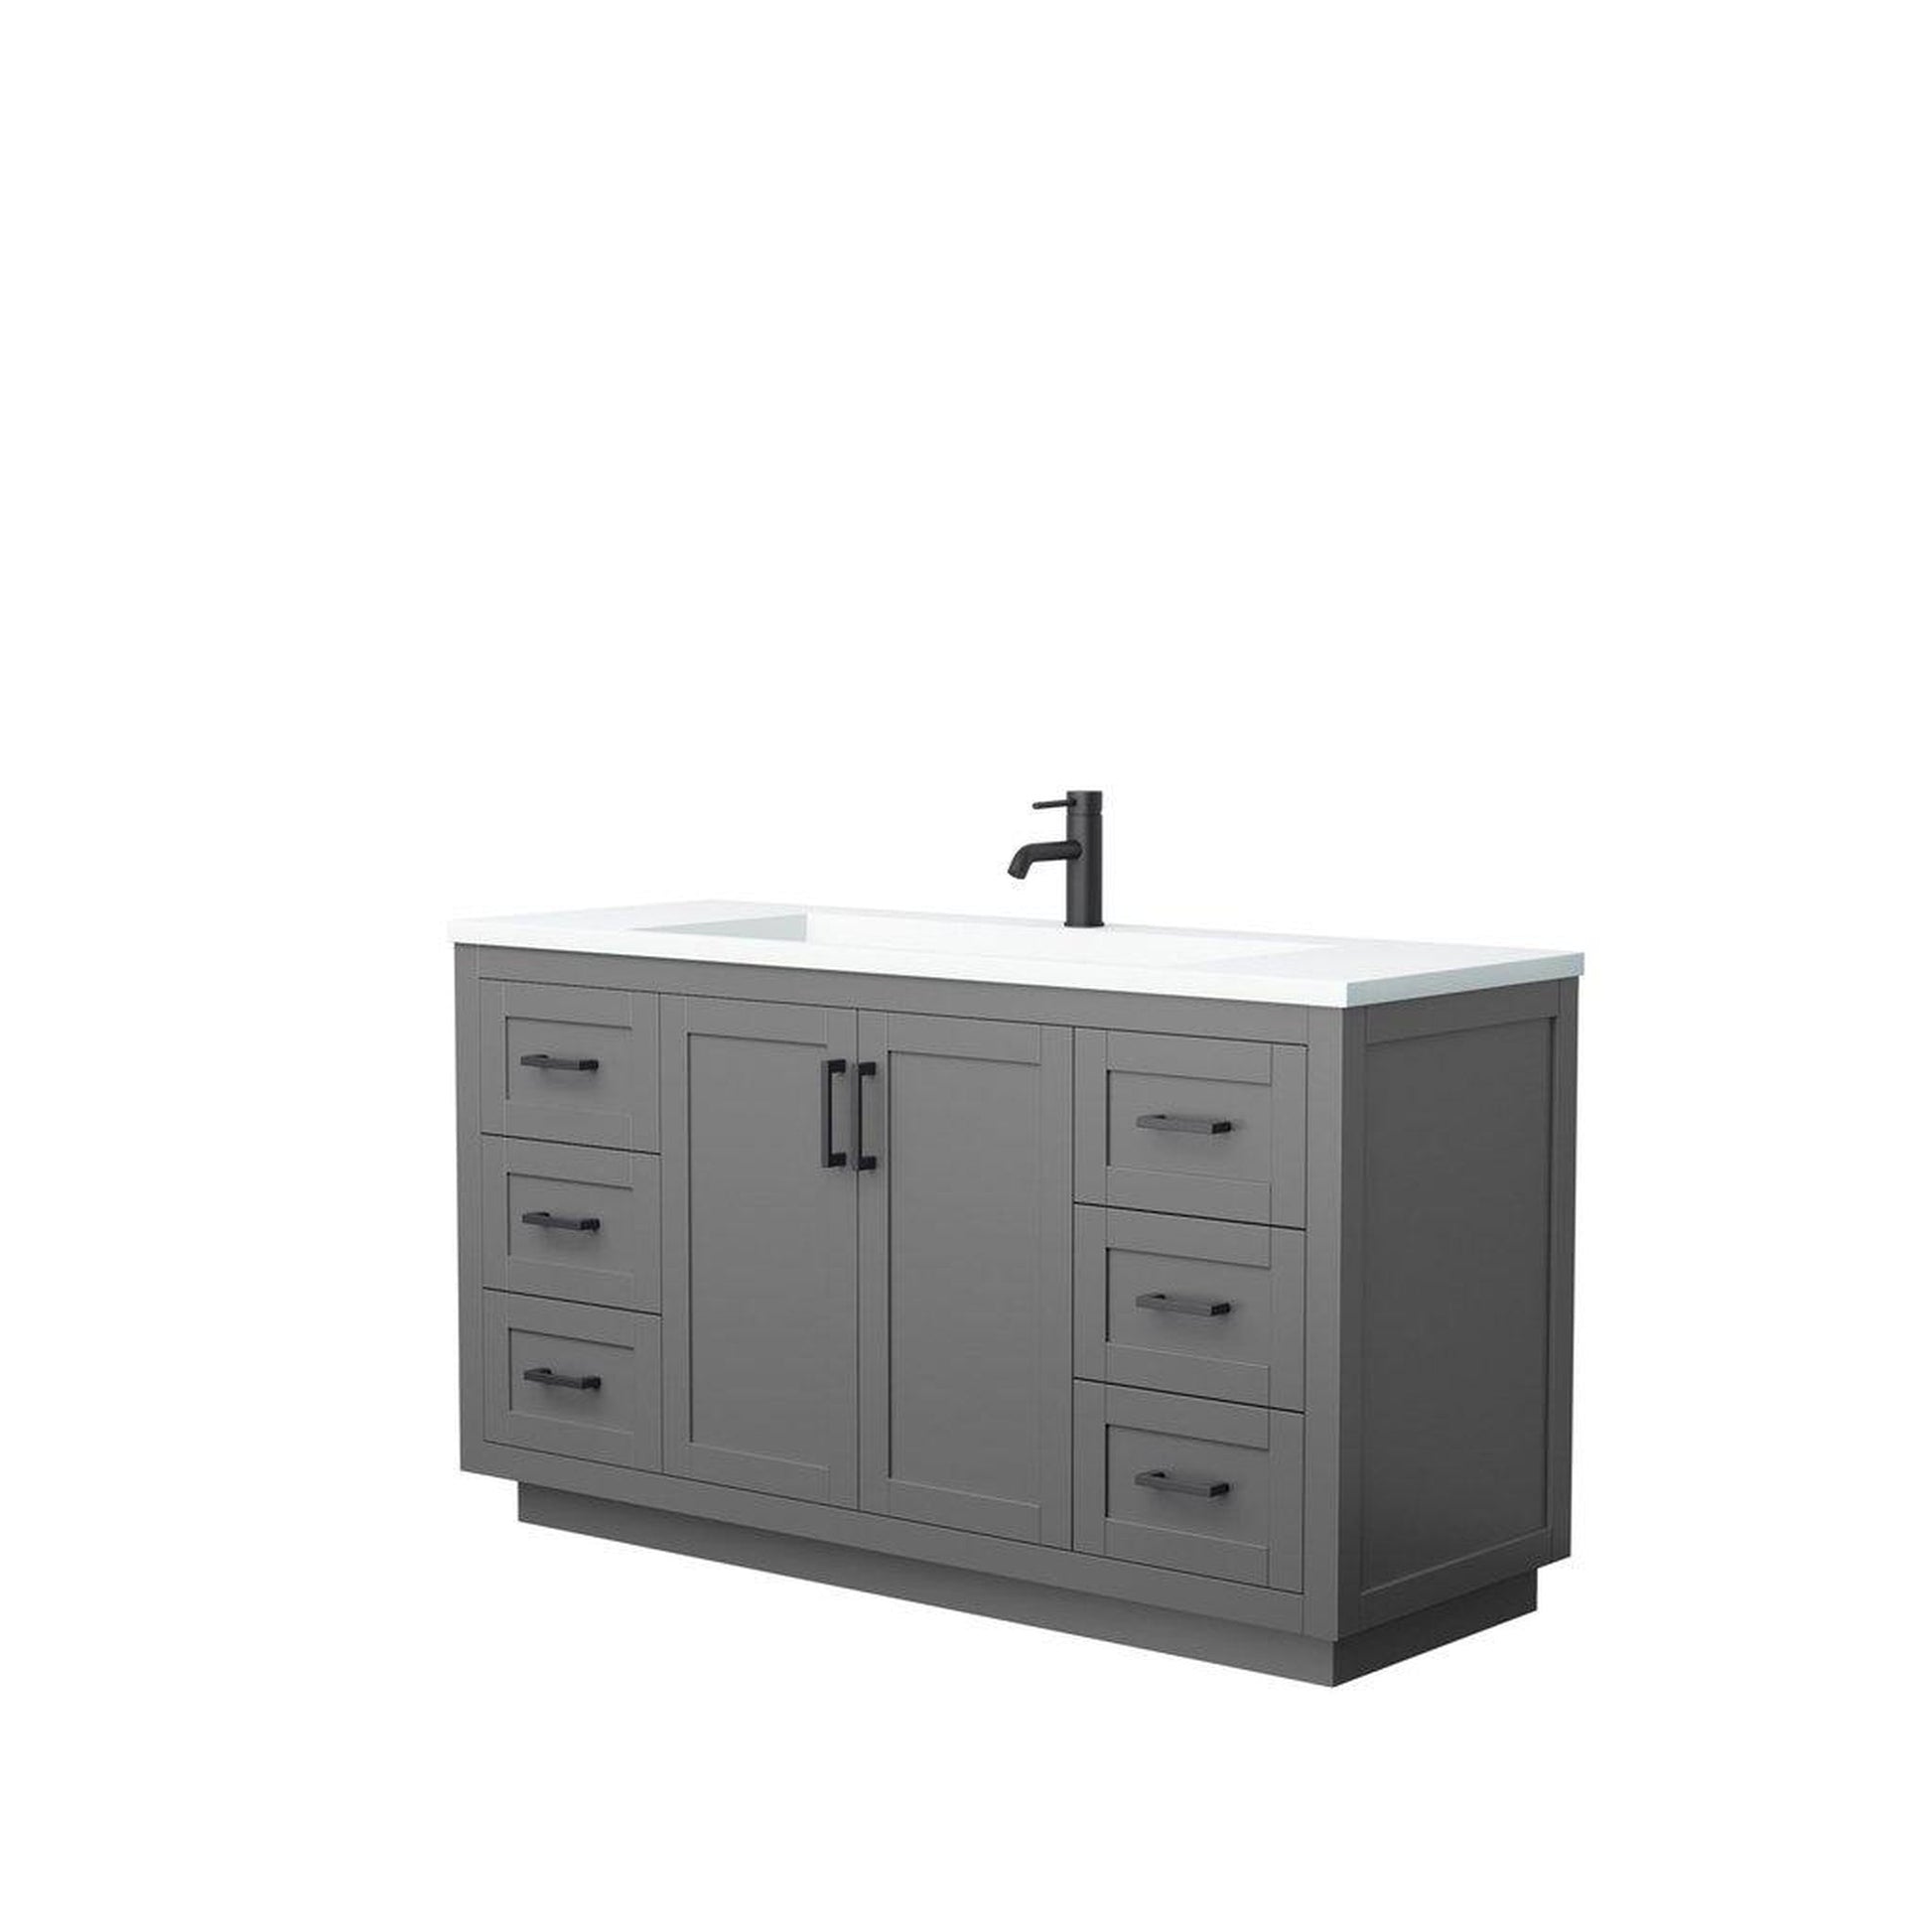 Wyndham Collection Miranda 60" Single Bathroom Dark Gray Vanity Set With 1.25" Thick Matte White Solid Surface Countertop, Integrated Sink, And Matte Black Trim